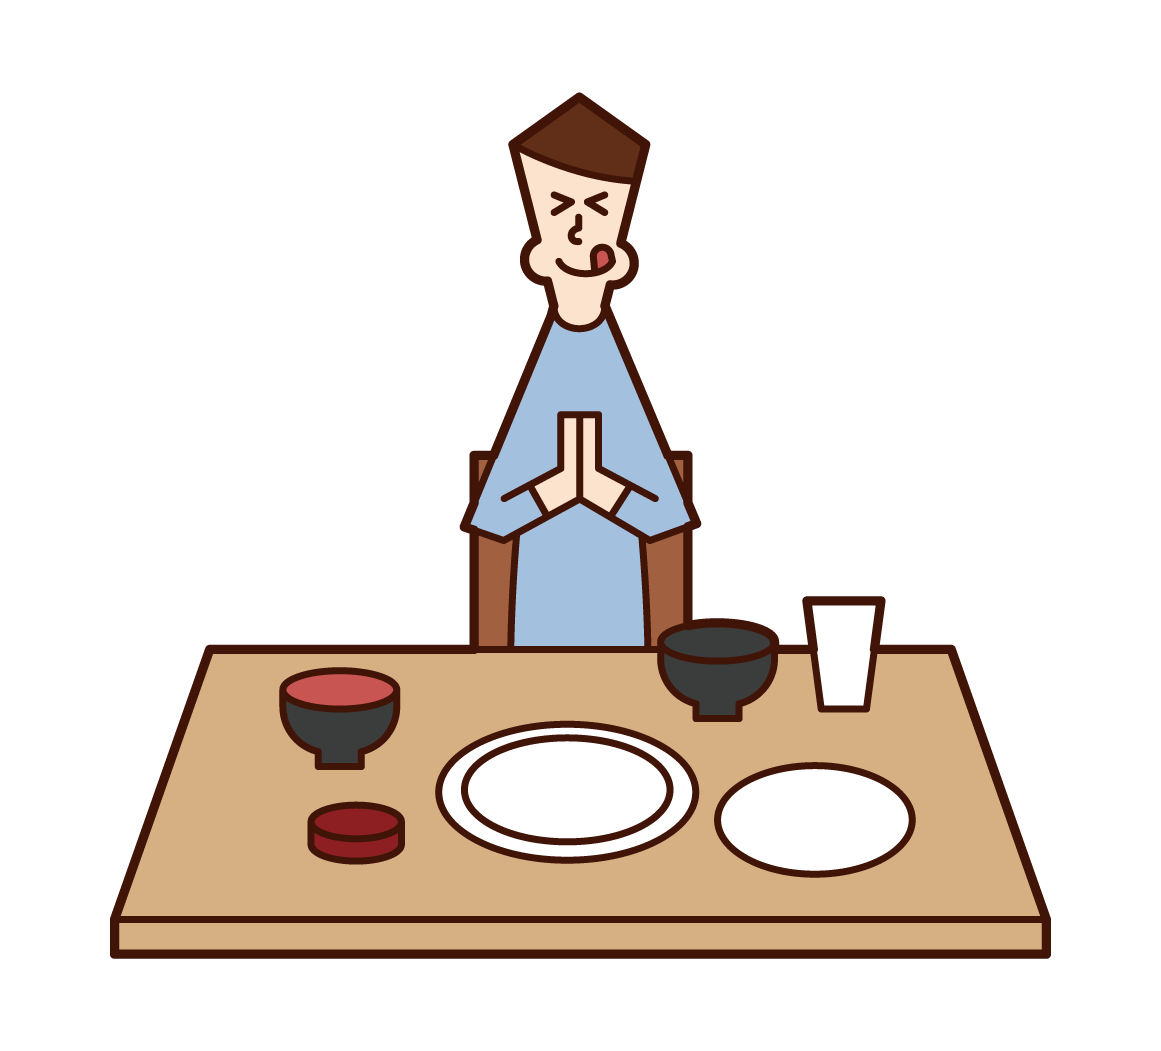 Illustration of a man who is feasting